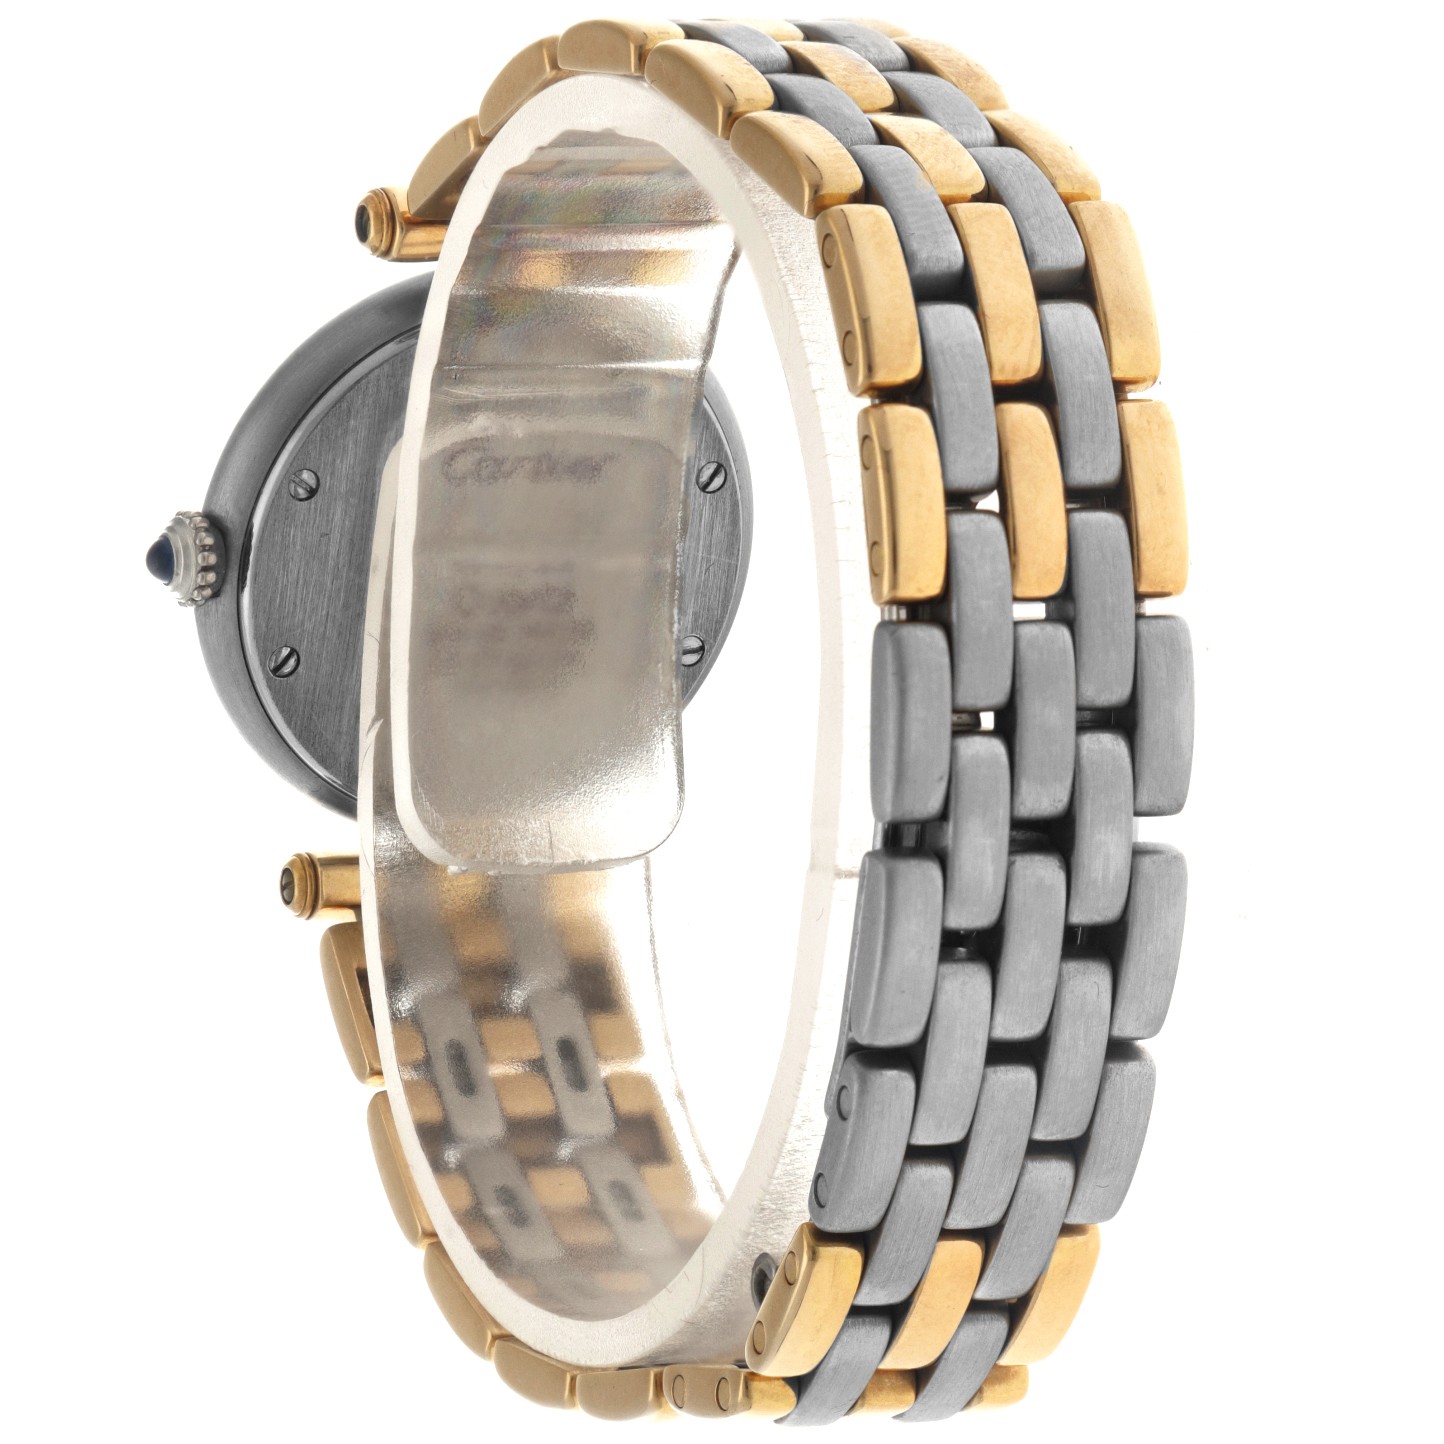 No Reserve - Cartier Panthère '3 Row' 166920 - Ladies watch - approx. 1990. - Image 3 of 6